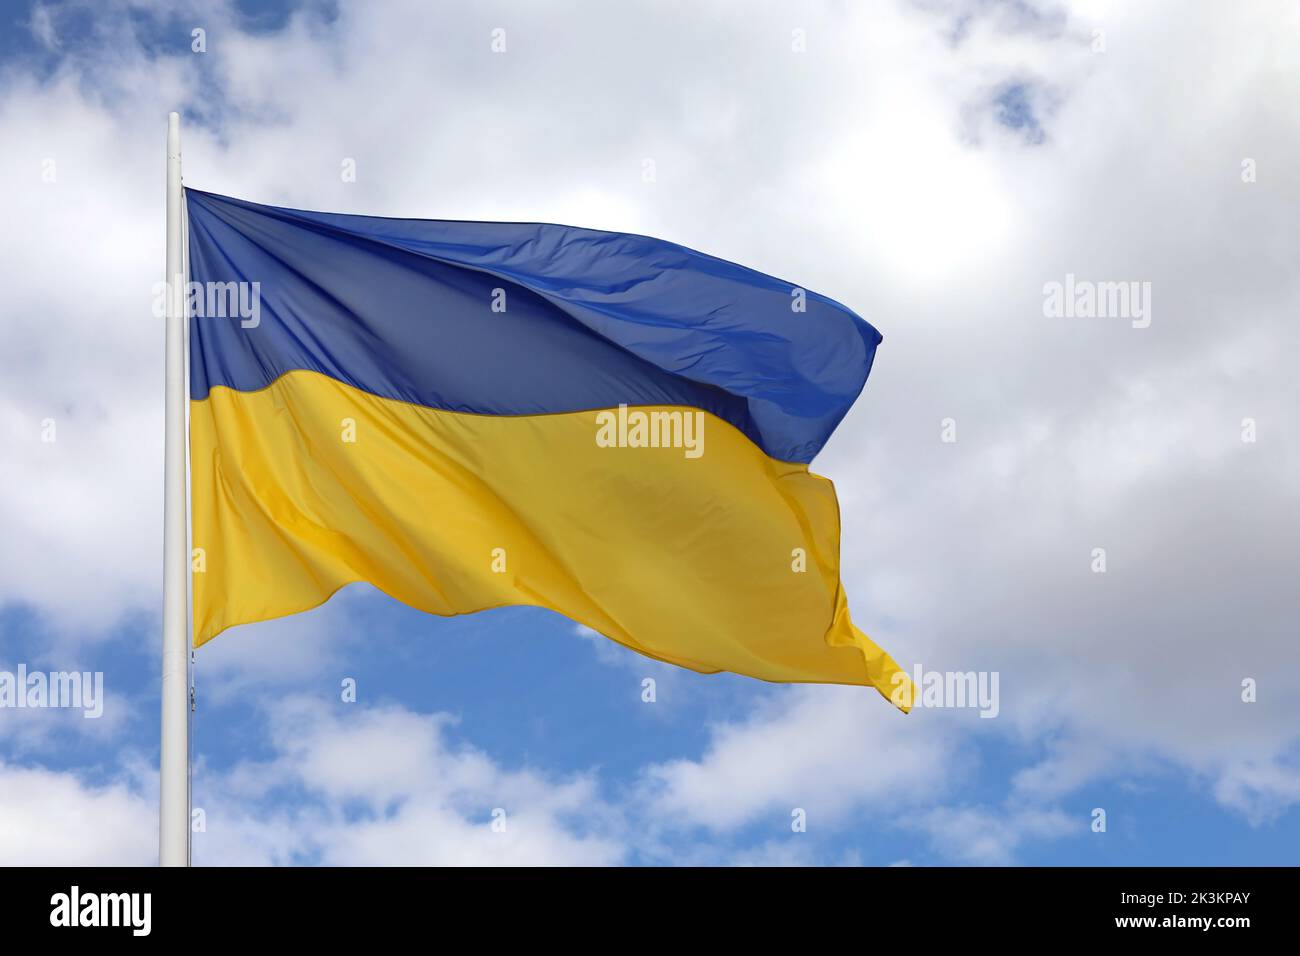 big ukrainian flag on blue sky with blue and yellows colors Stock Photo